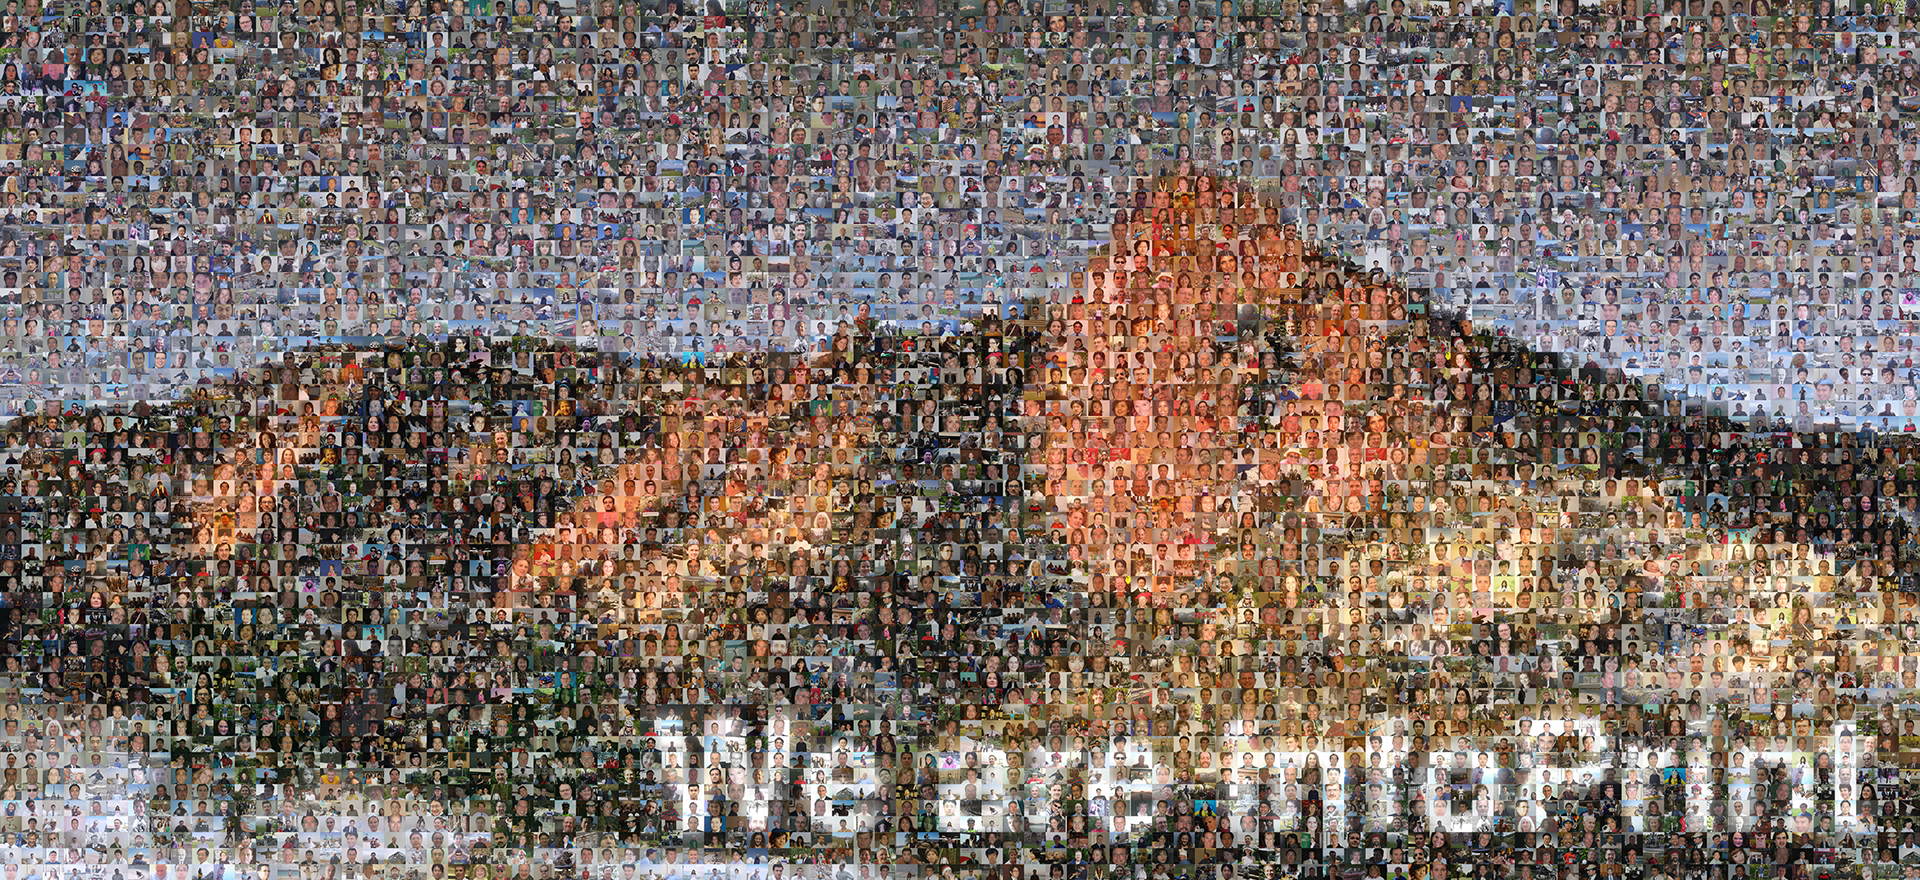 photo mosaic 44' x 96' canvas mural created using over 1600 employee submitted photos